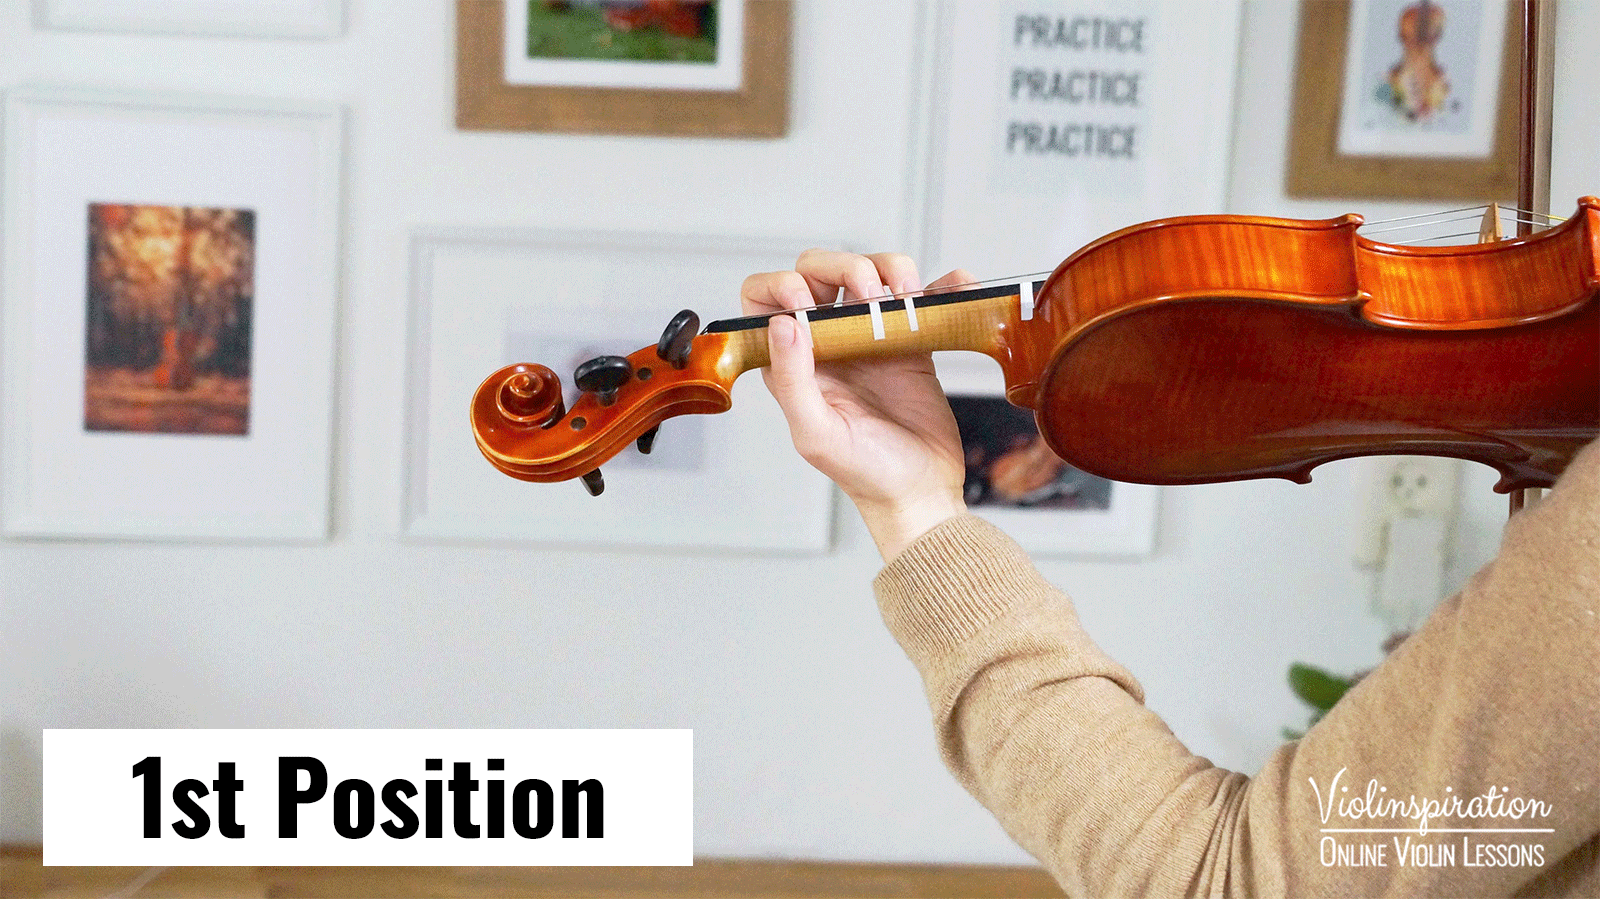 All Violin Positions - thumb position